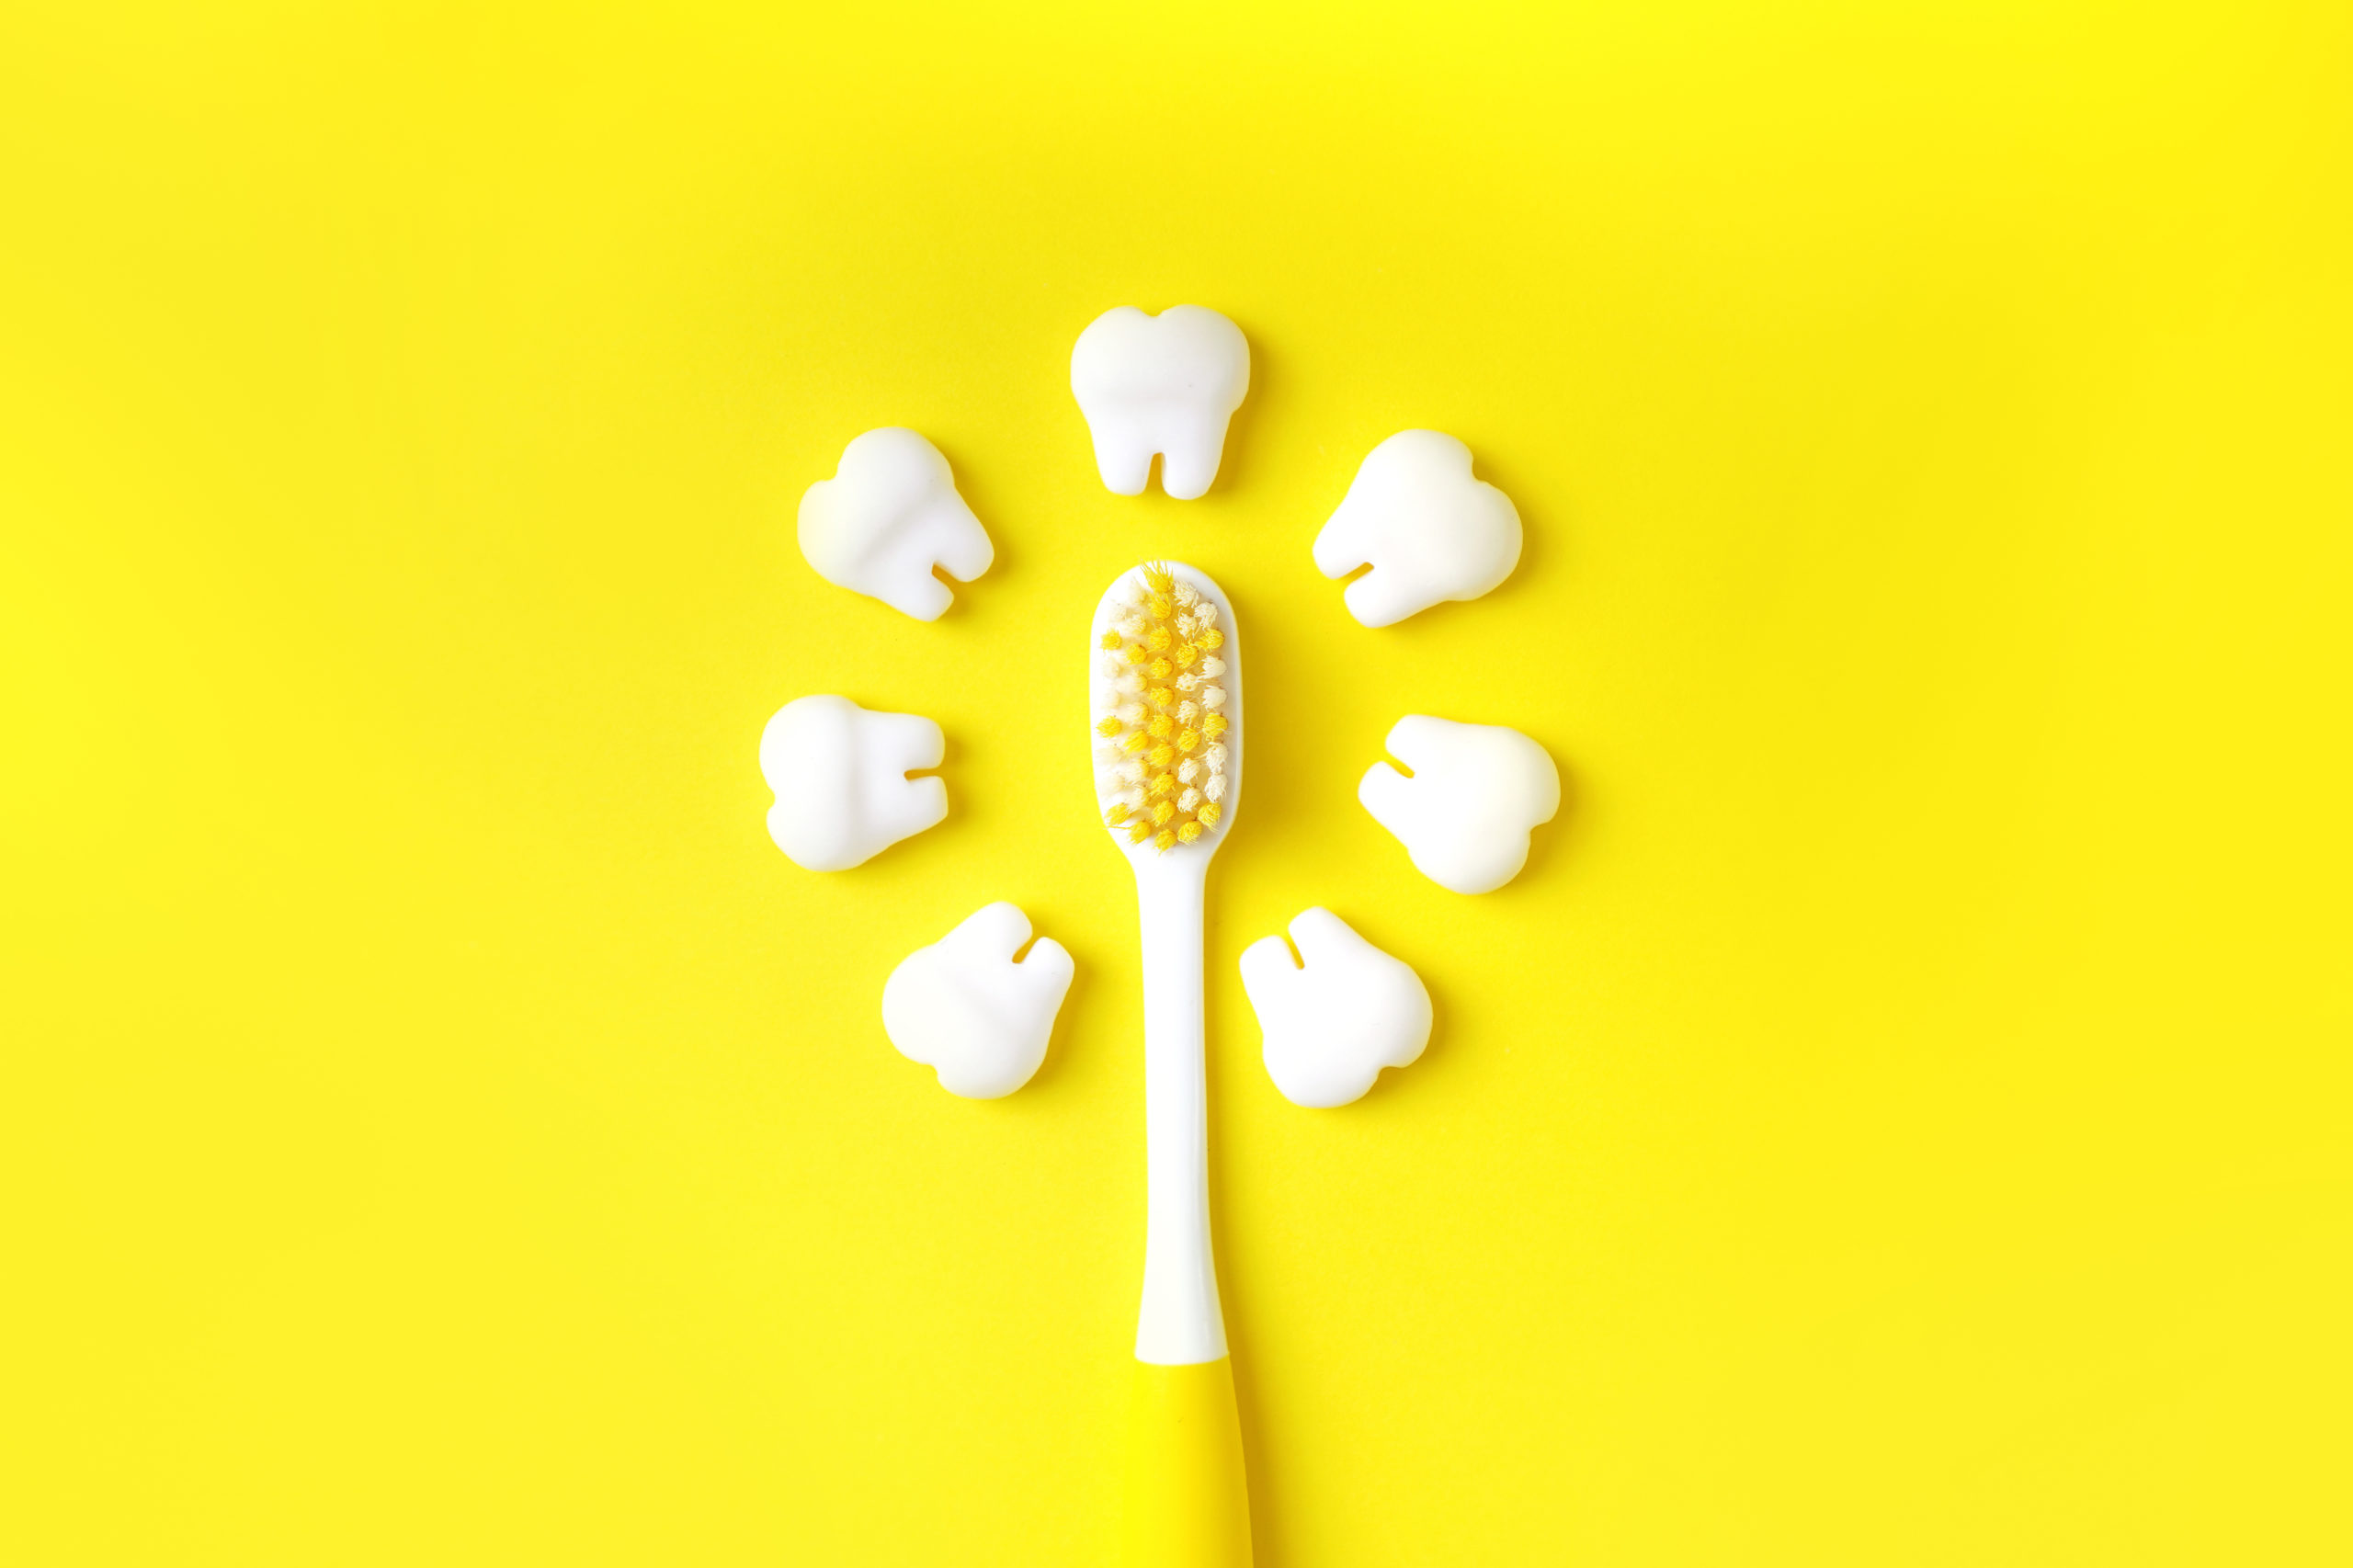 Toothbrush with teeth models making sun on a yellow background